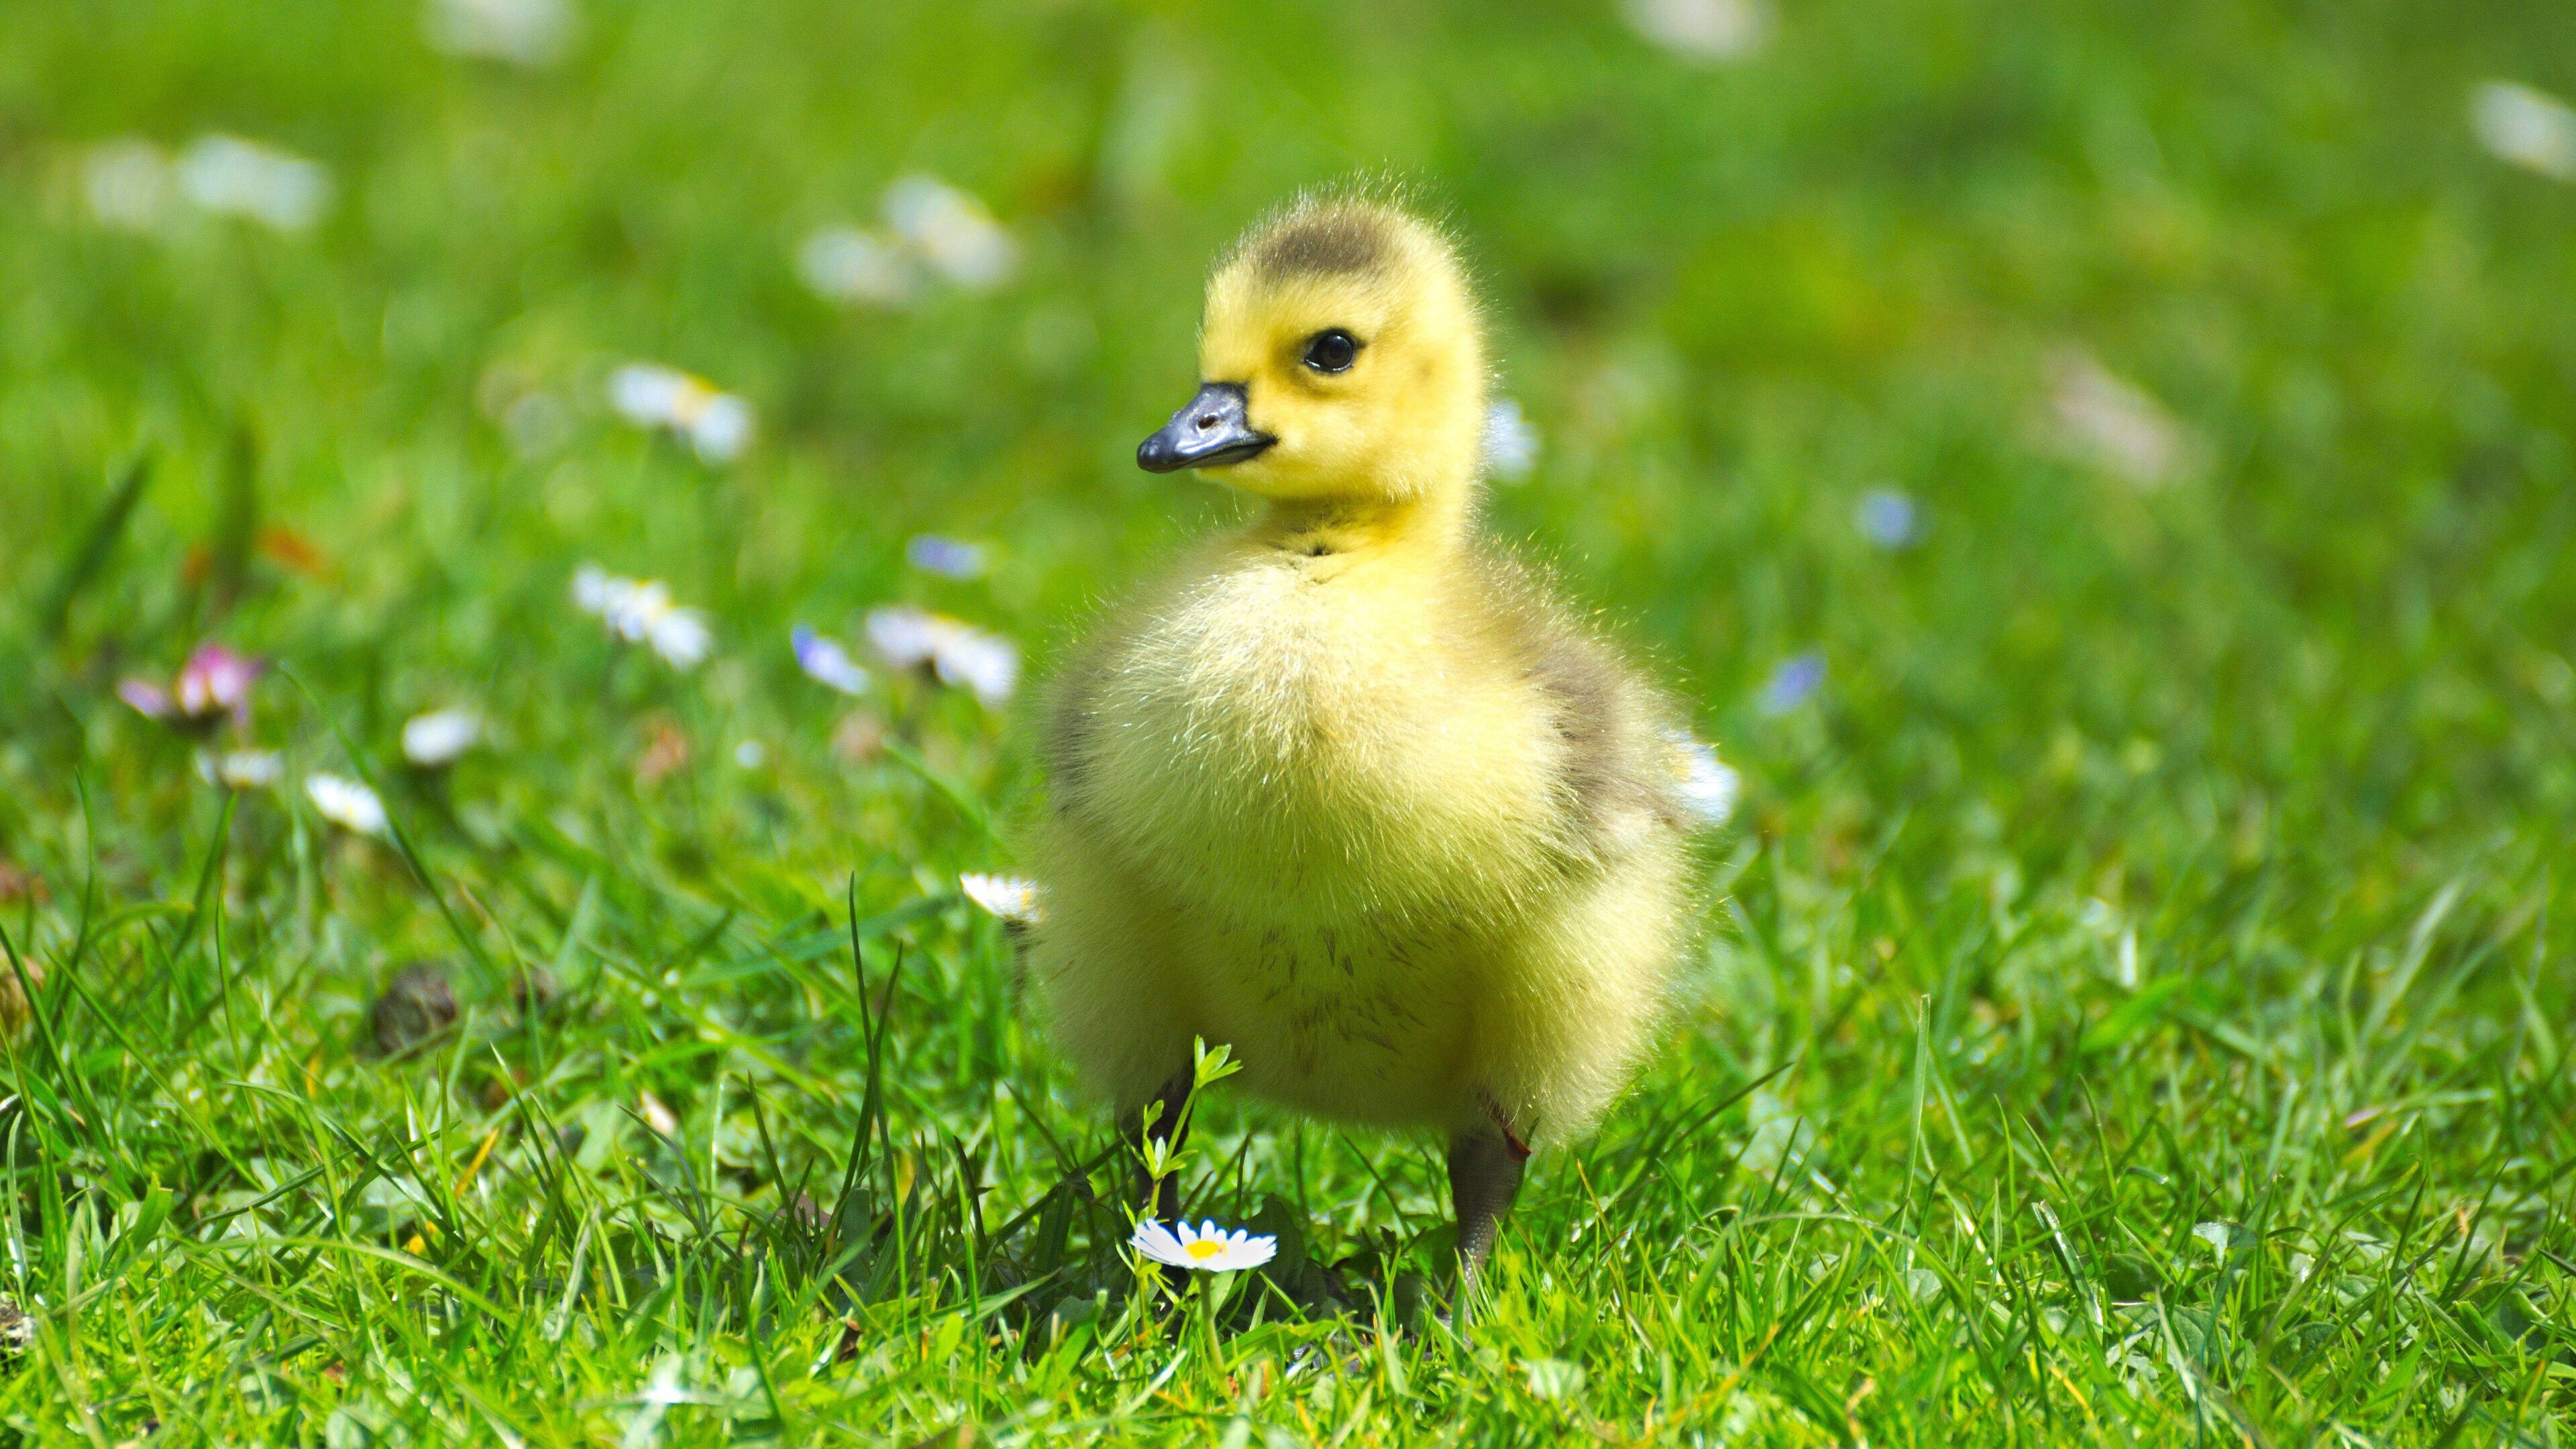 Geese: Chick on the grass, Web-footed swimming birds of the family Anatidae. 3840x2160 4K Wallpaper.